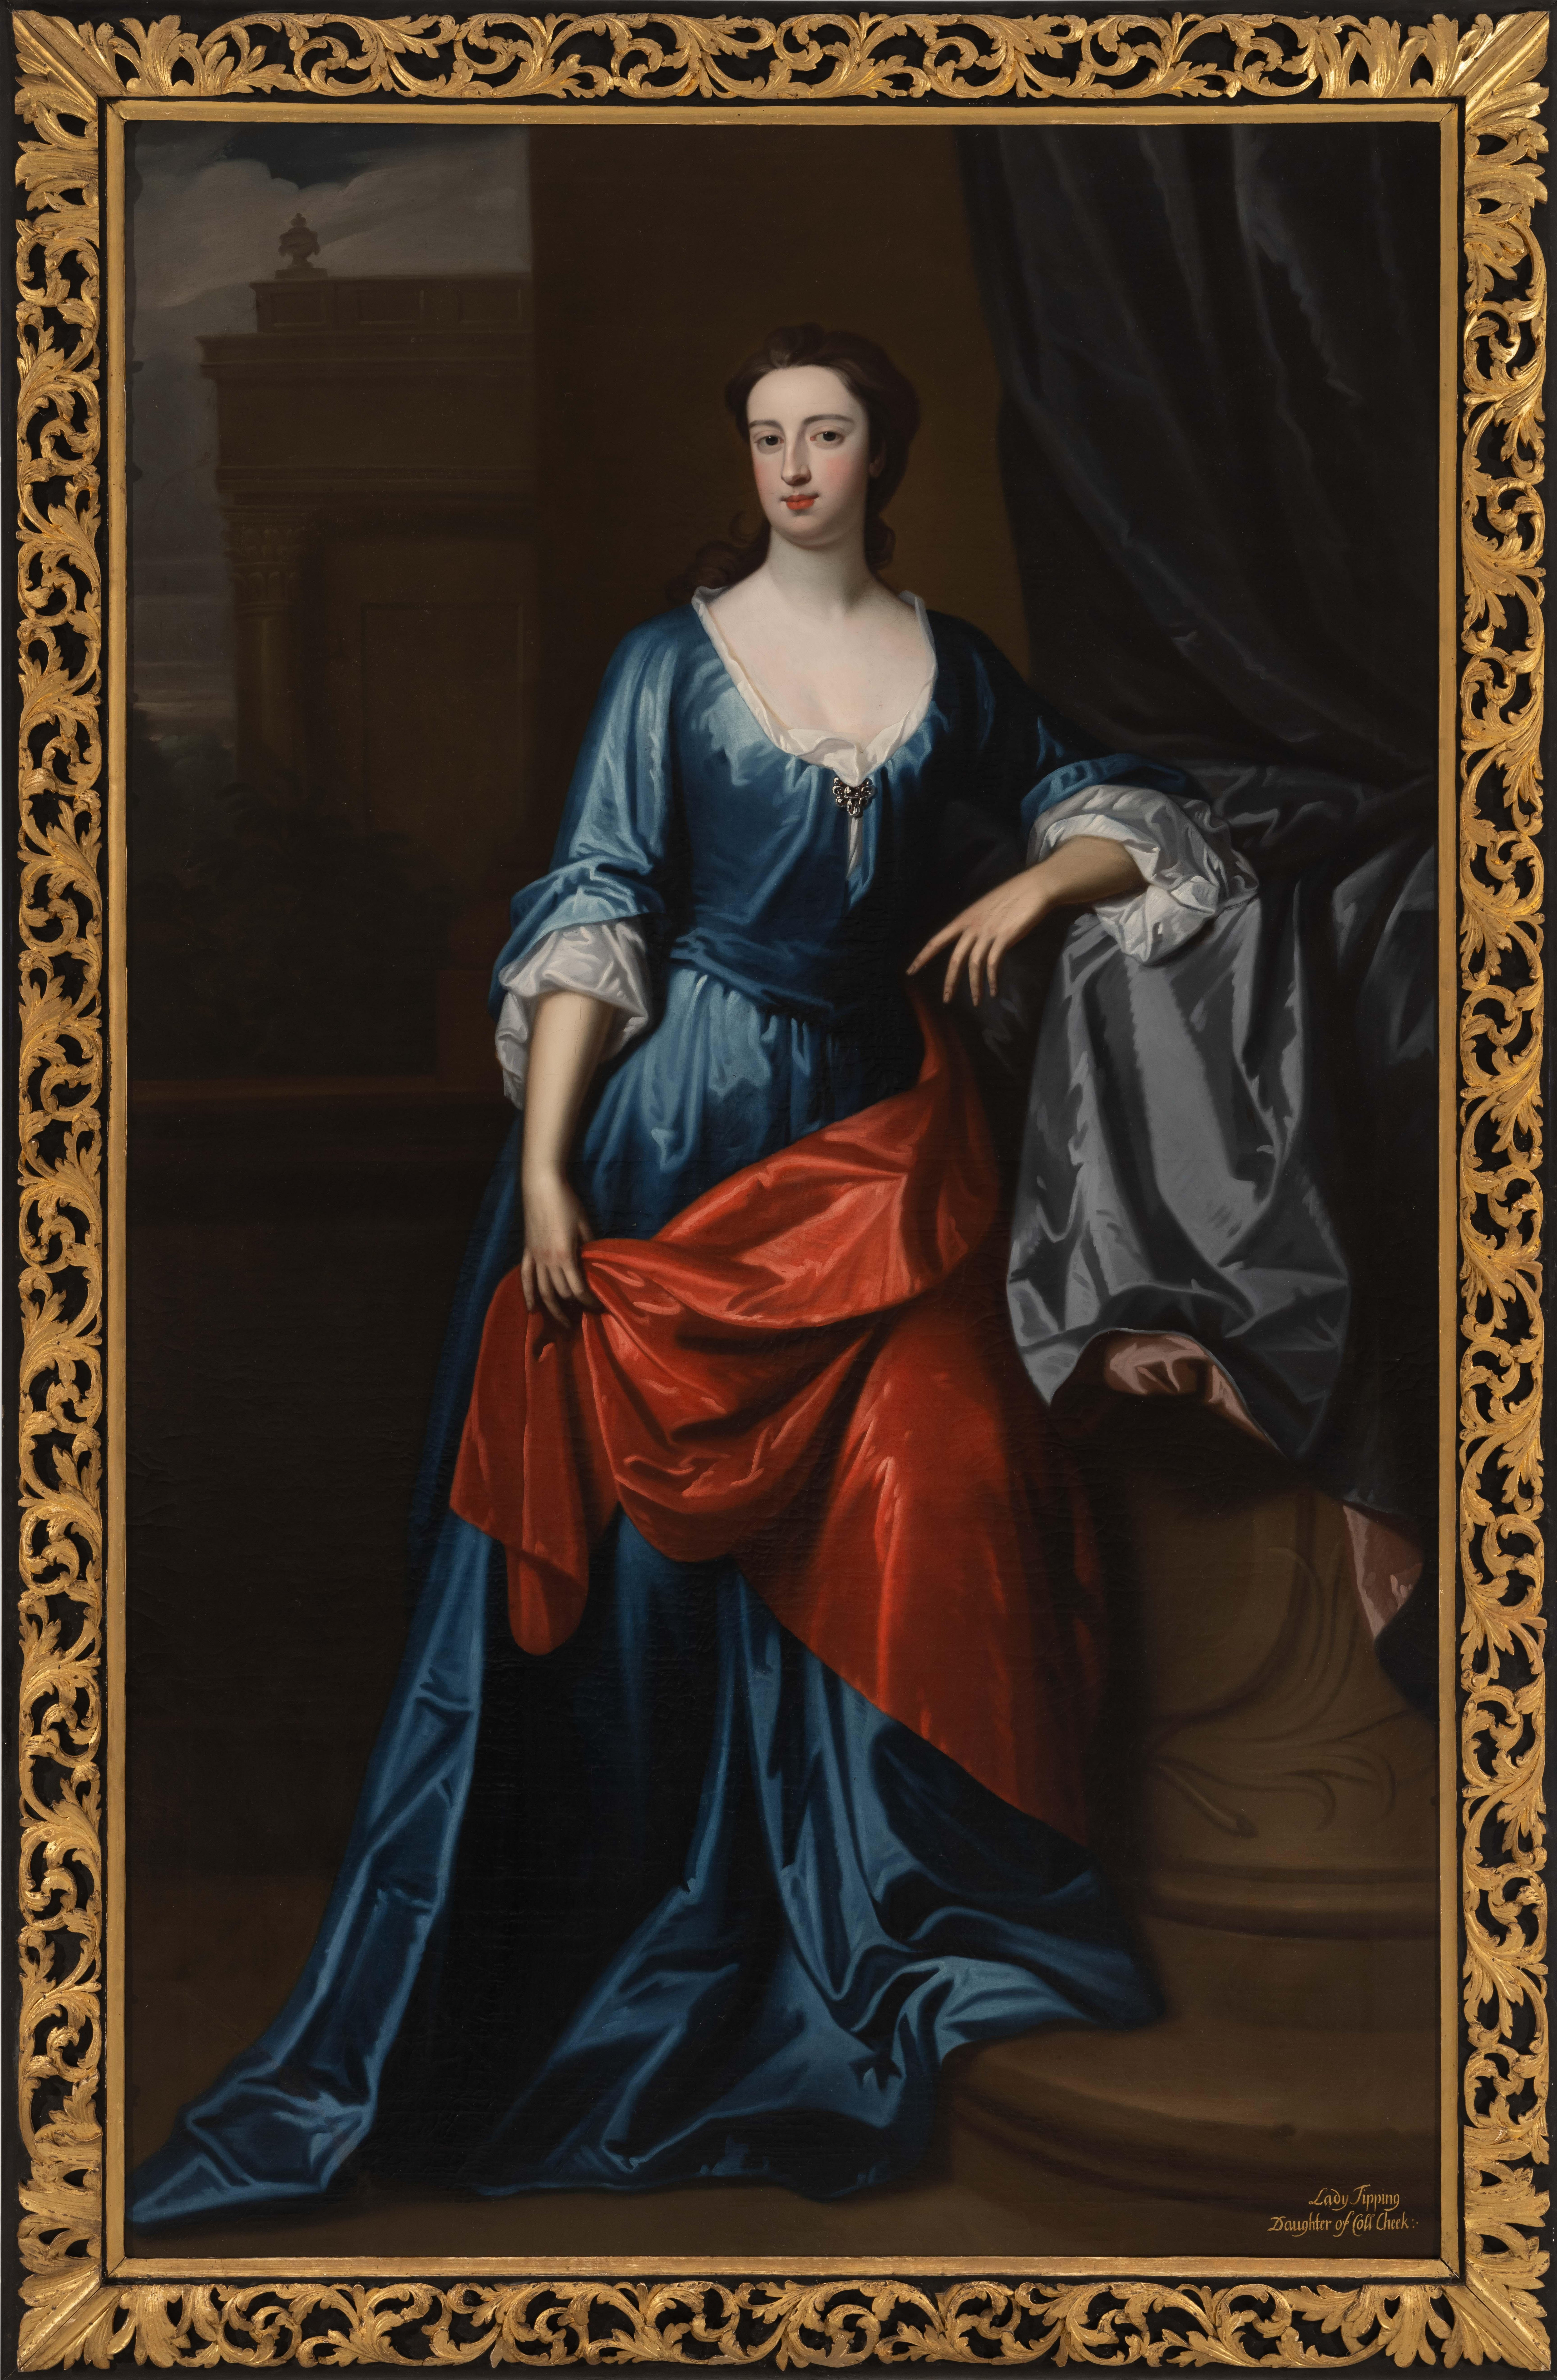 Portrait of Lady Anne Tipping née Cheke c.1705, English Aristocratic Collection - Art by Kneller Godfrey